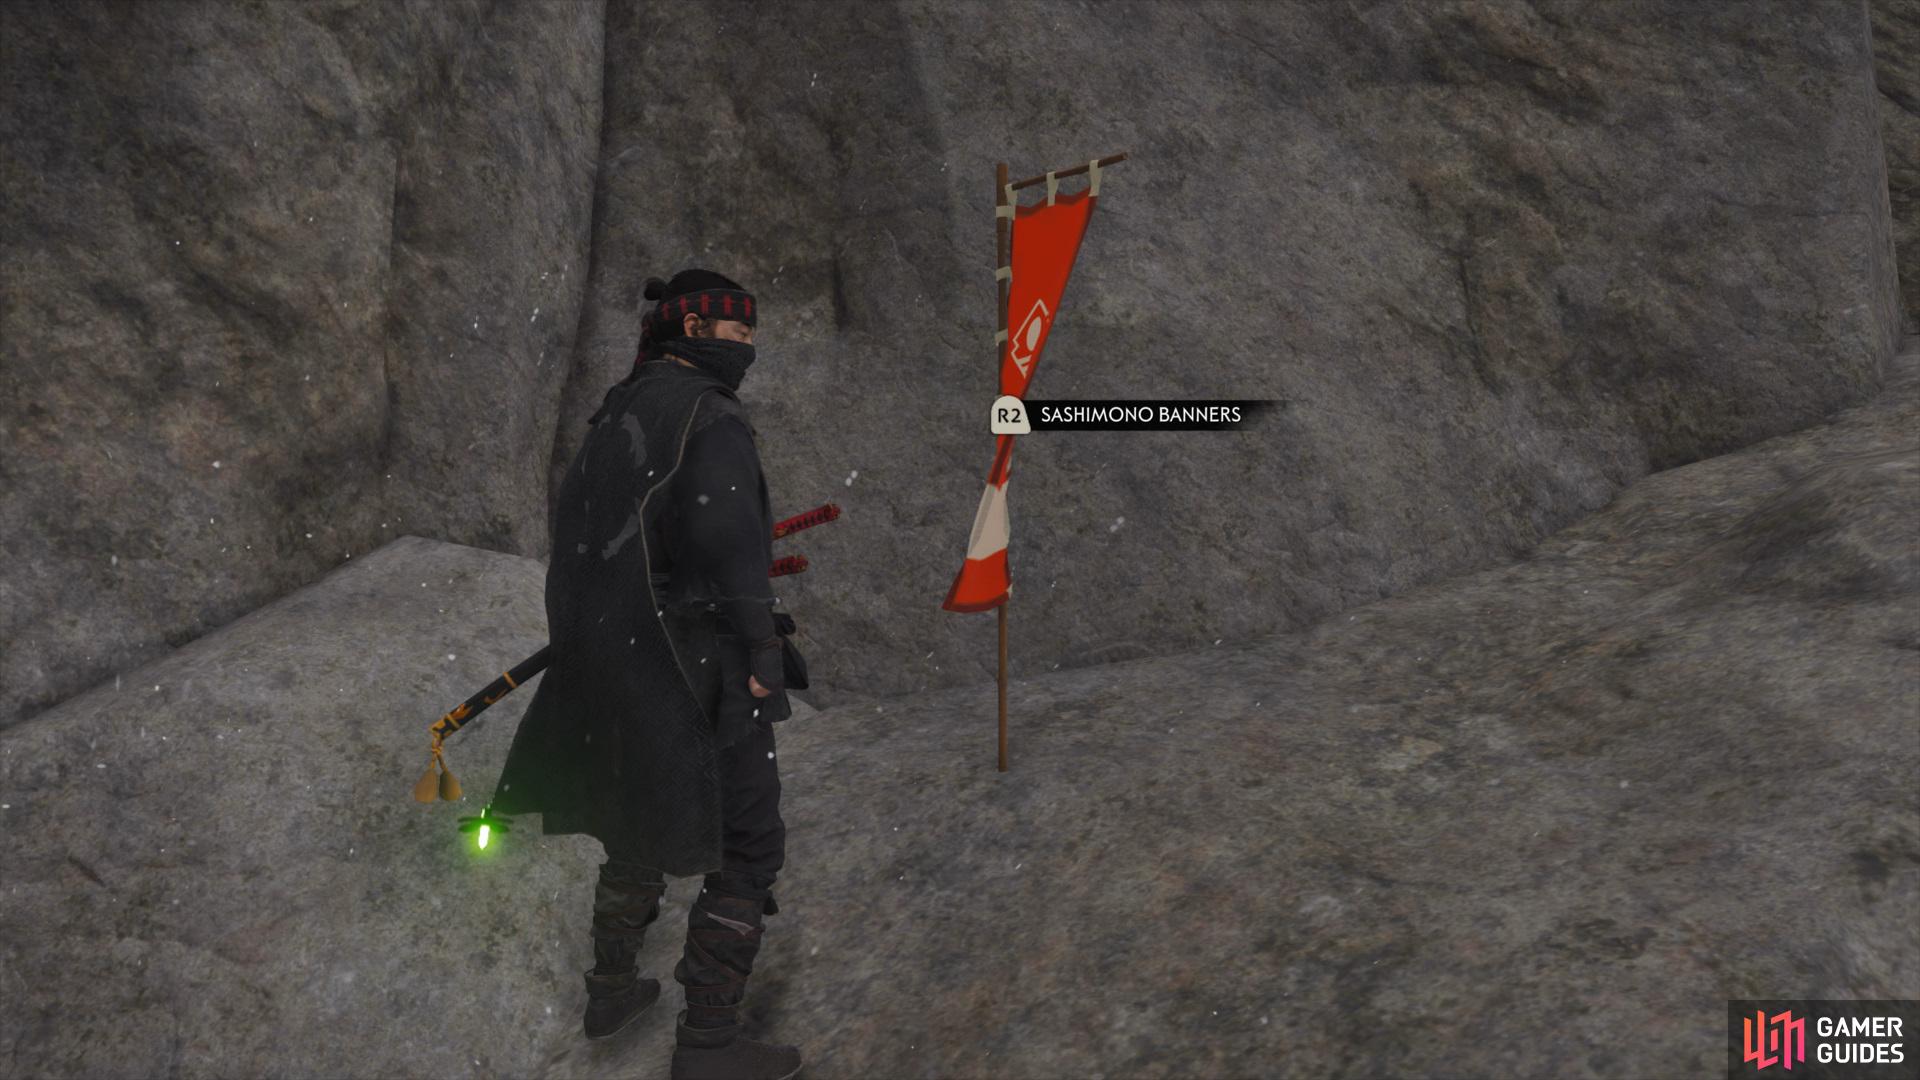  and climb the cliff to find this banner.